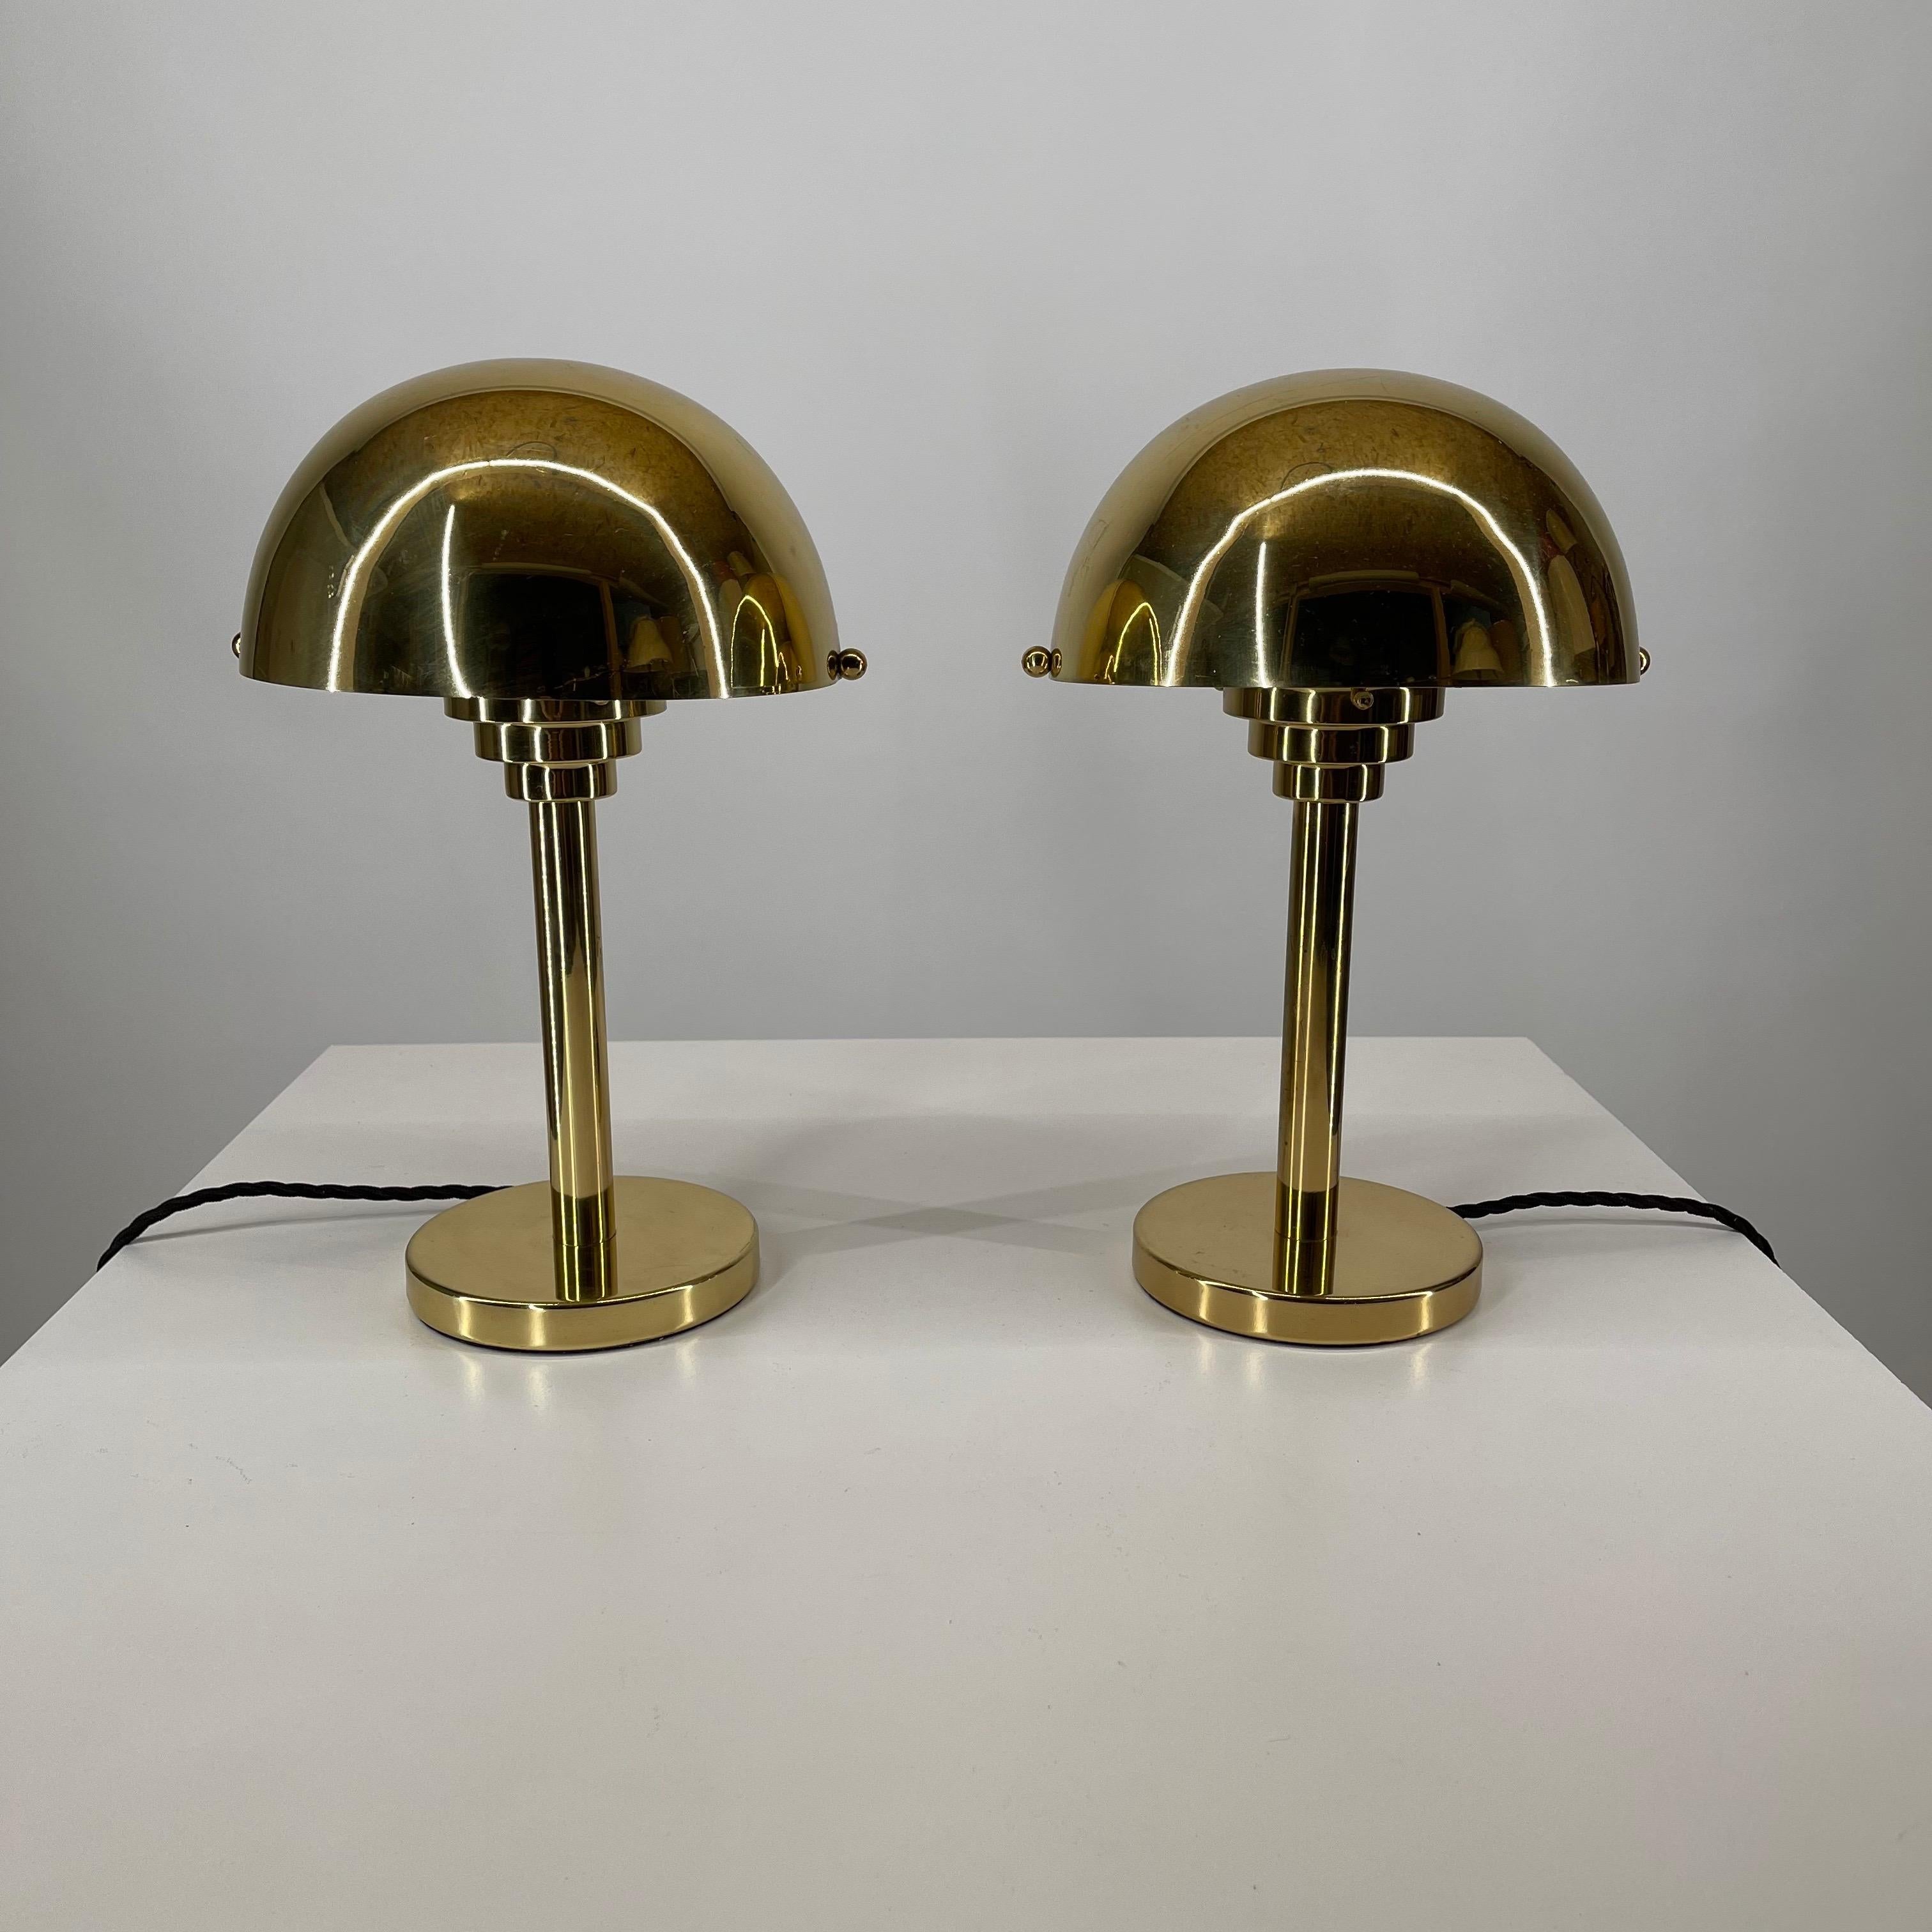 Art Deco brass mushroom table lamp, Austria 1970. Rewired with cloth cable.